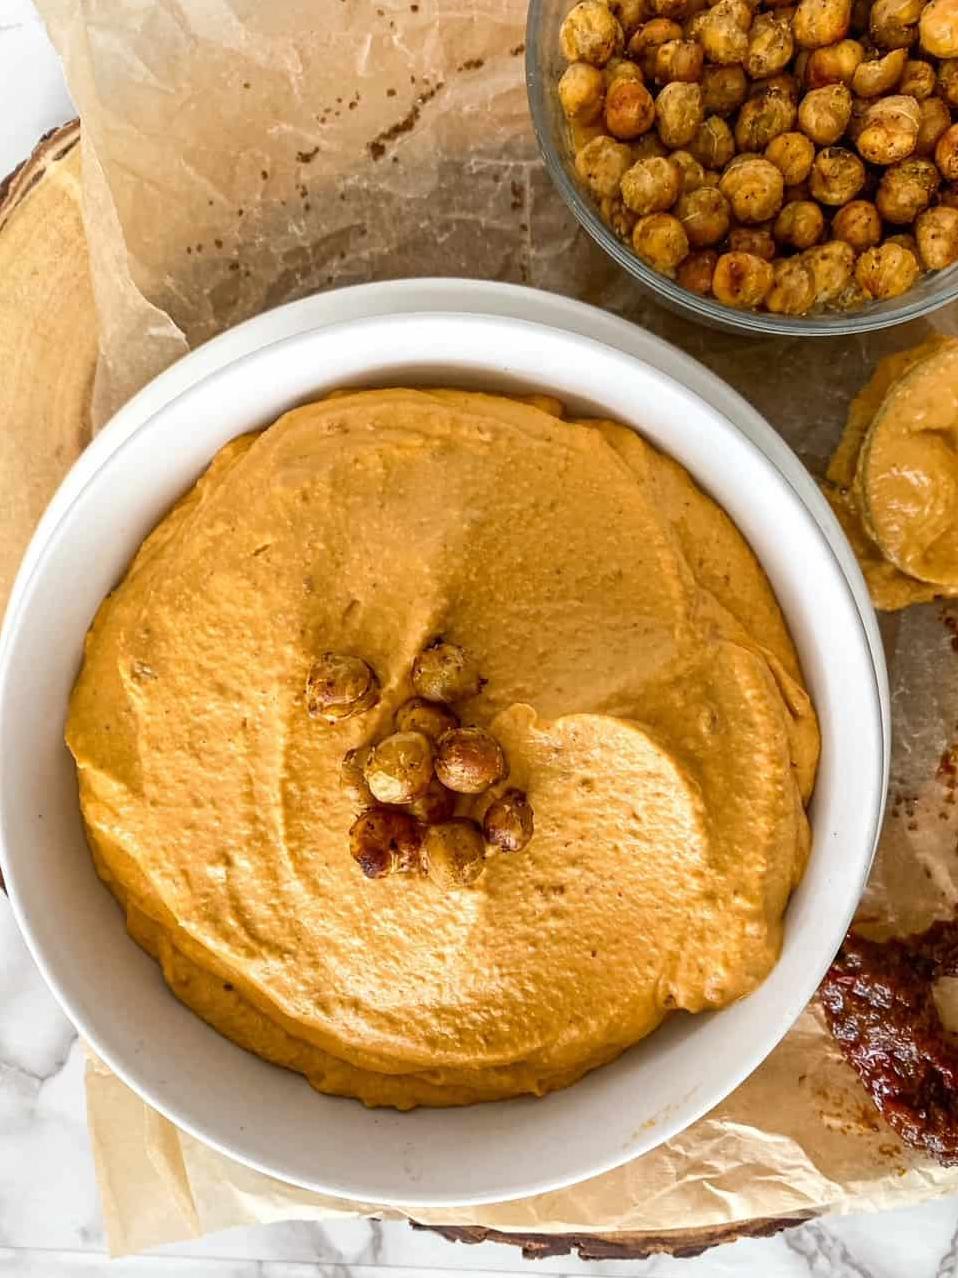  You'll love the creamy texture of this hummus and the smoky heat that lingers on your tongue.